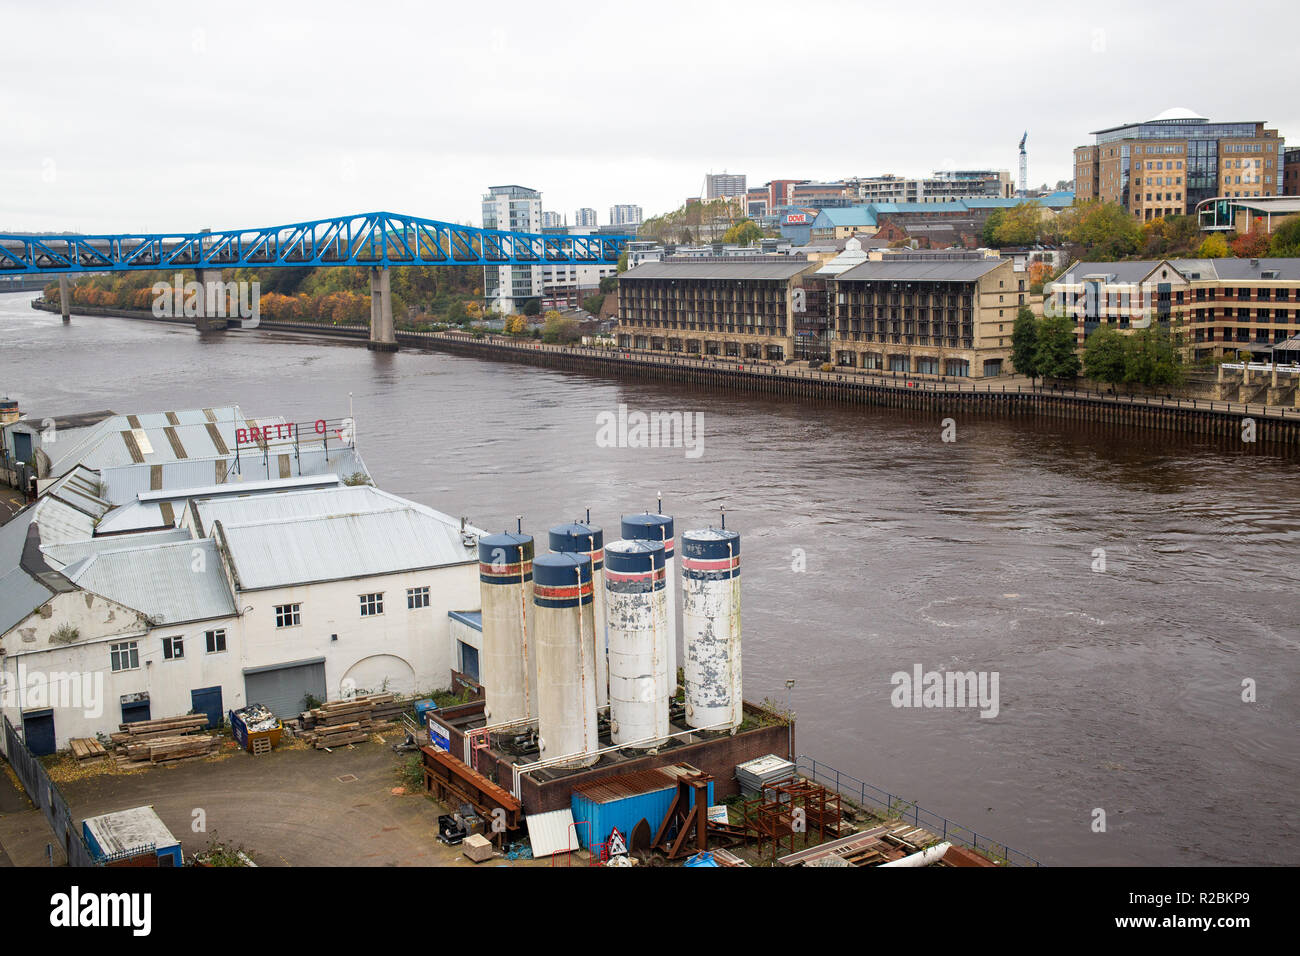 Newcastle/England - October 24th 2014: Old Brett Oil building on banks of River tyne, Newcastle cityscape Stock Photo